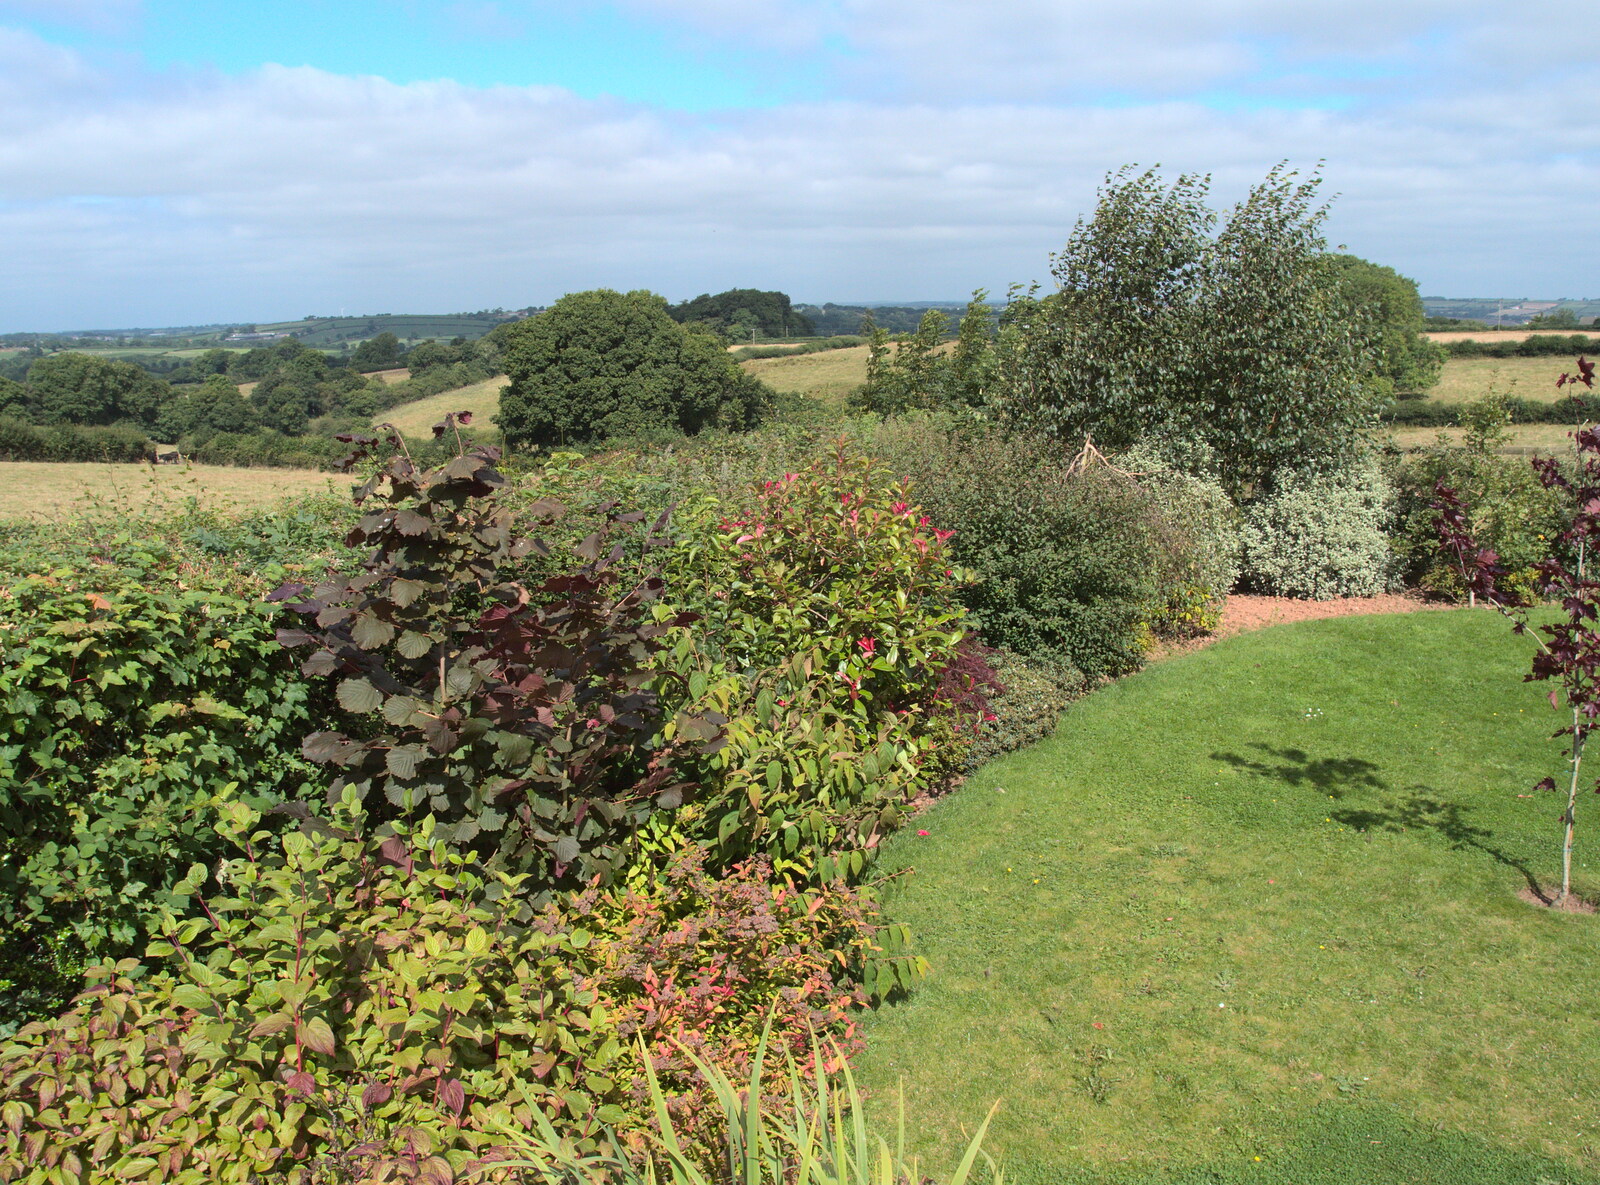 A view from Mother's garden from The Tom Cobley and Castle Drogo, Spreyton and Drewsteignton, Devon - 11th August 2016